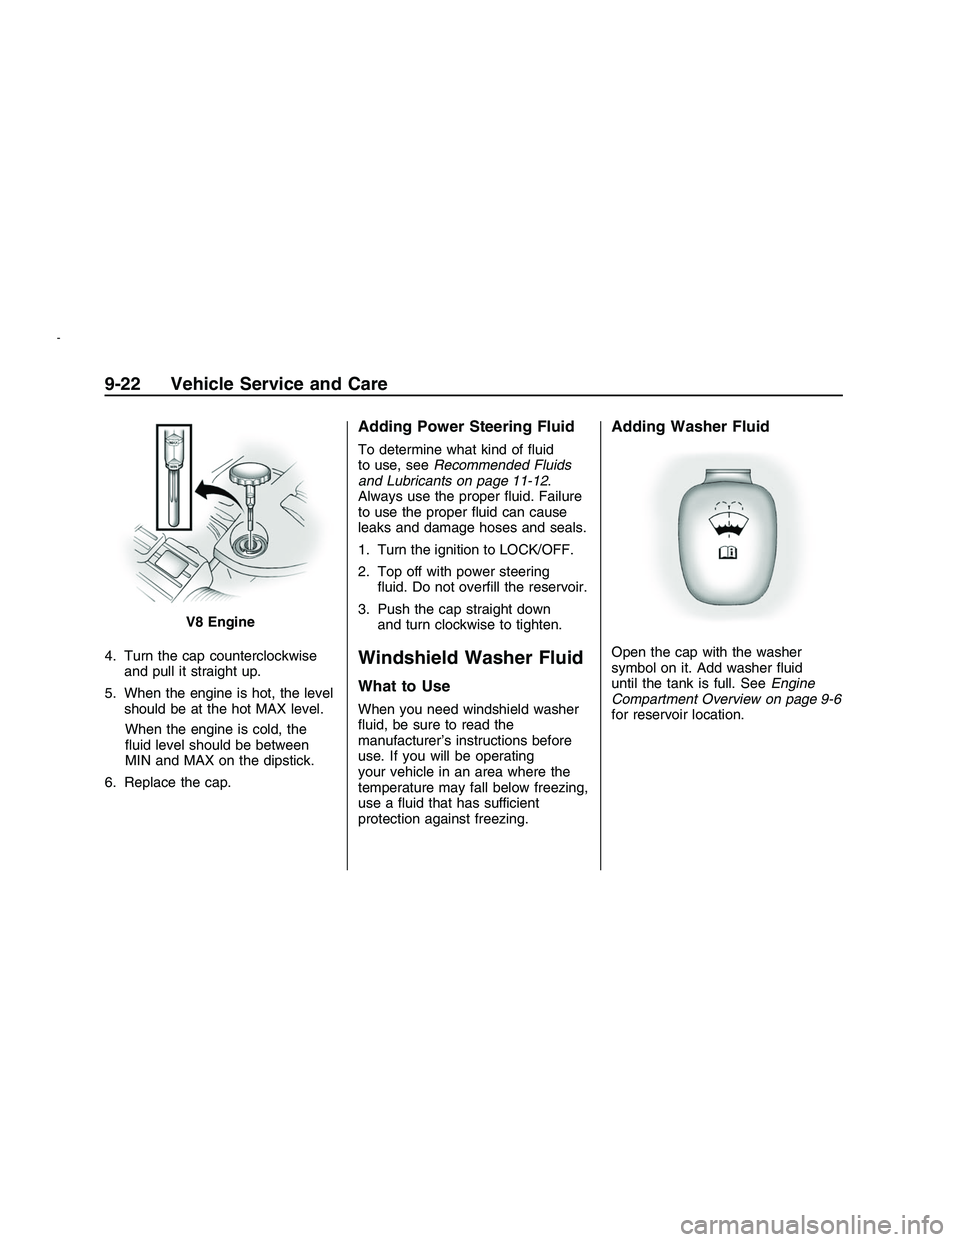 PONTIAC G8 2008  Owners Manual 4. Turn the cap counterclockwise
and pull it straight up.
5. When the engine is hot, the level
should be at the hot MAX level.
When the engine is cold, the
�uid level should be between
MIN and MAX on 